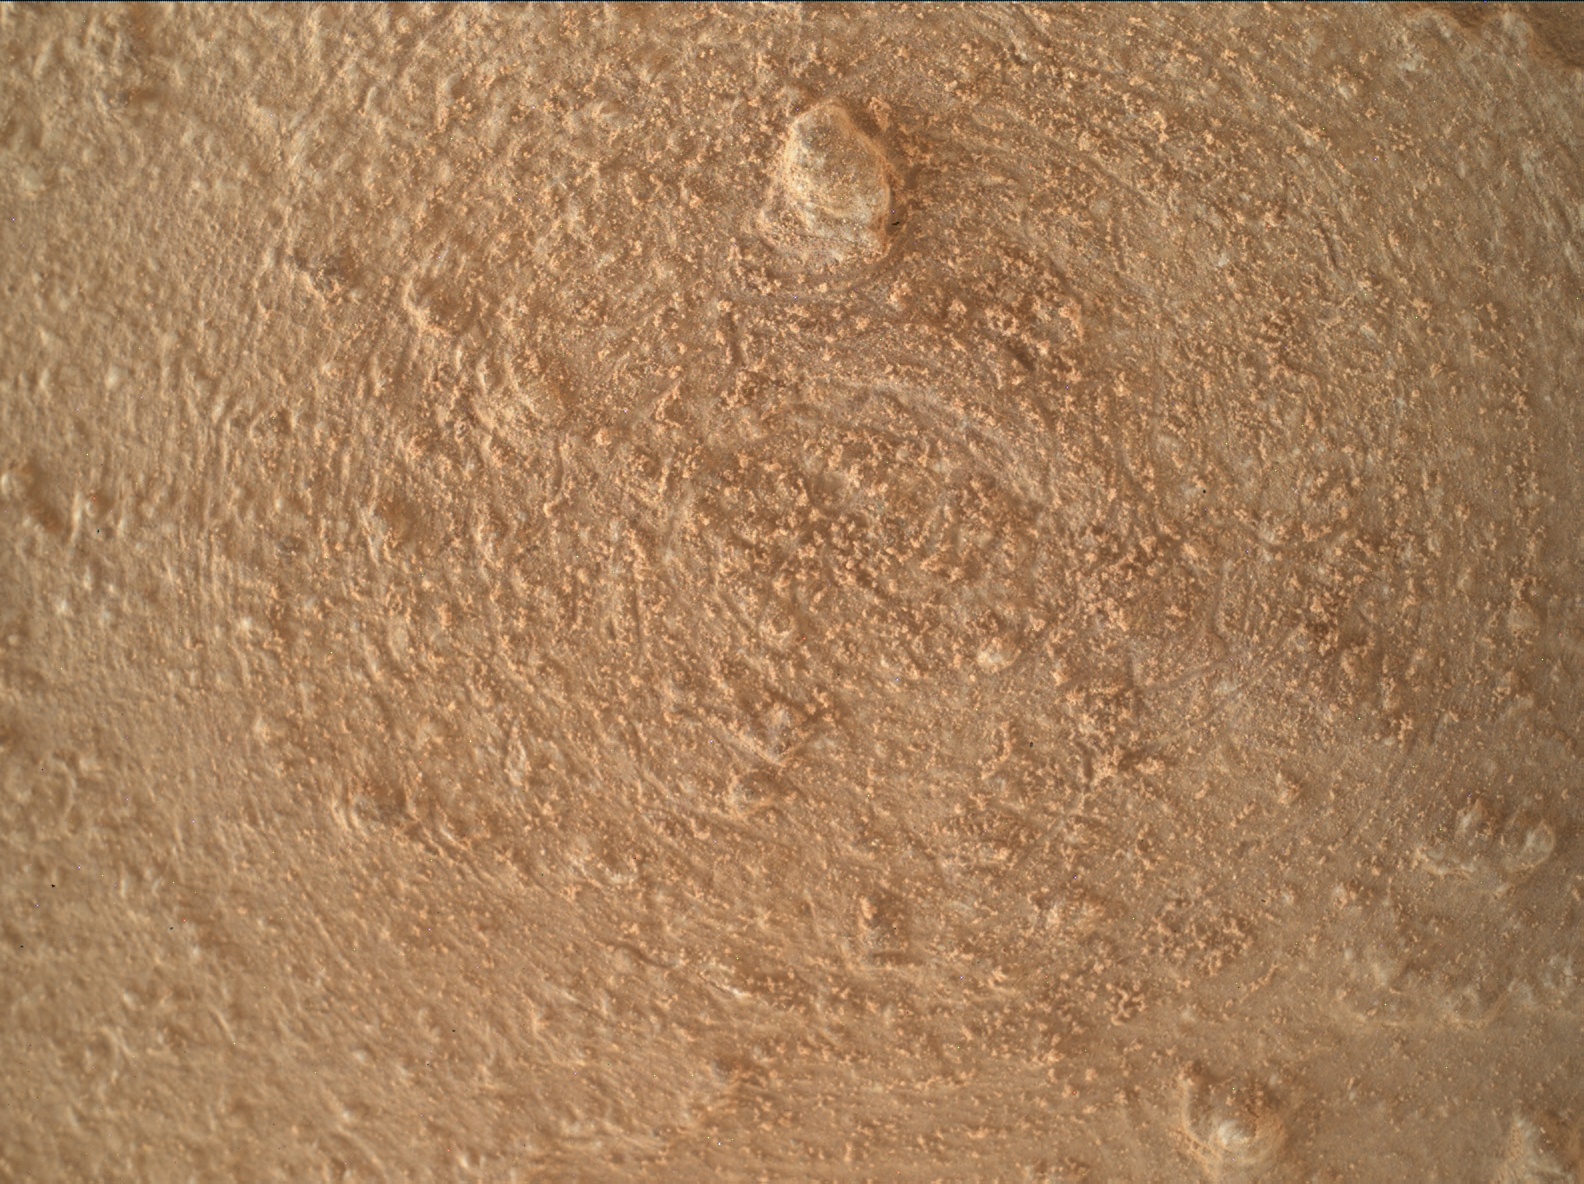 Nasa's Mars rover Curiosity acquired this image using its Mars Hand Lens Imager (MAHLI) on Sol 3819